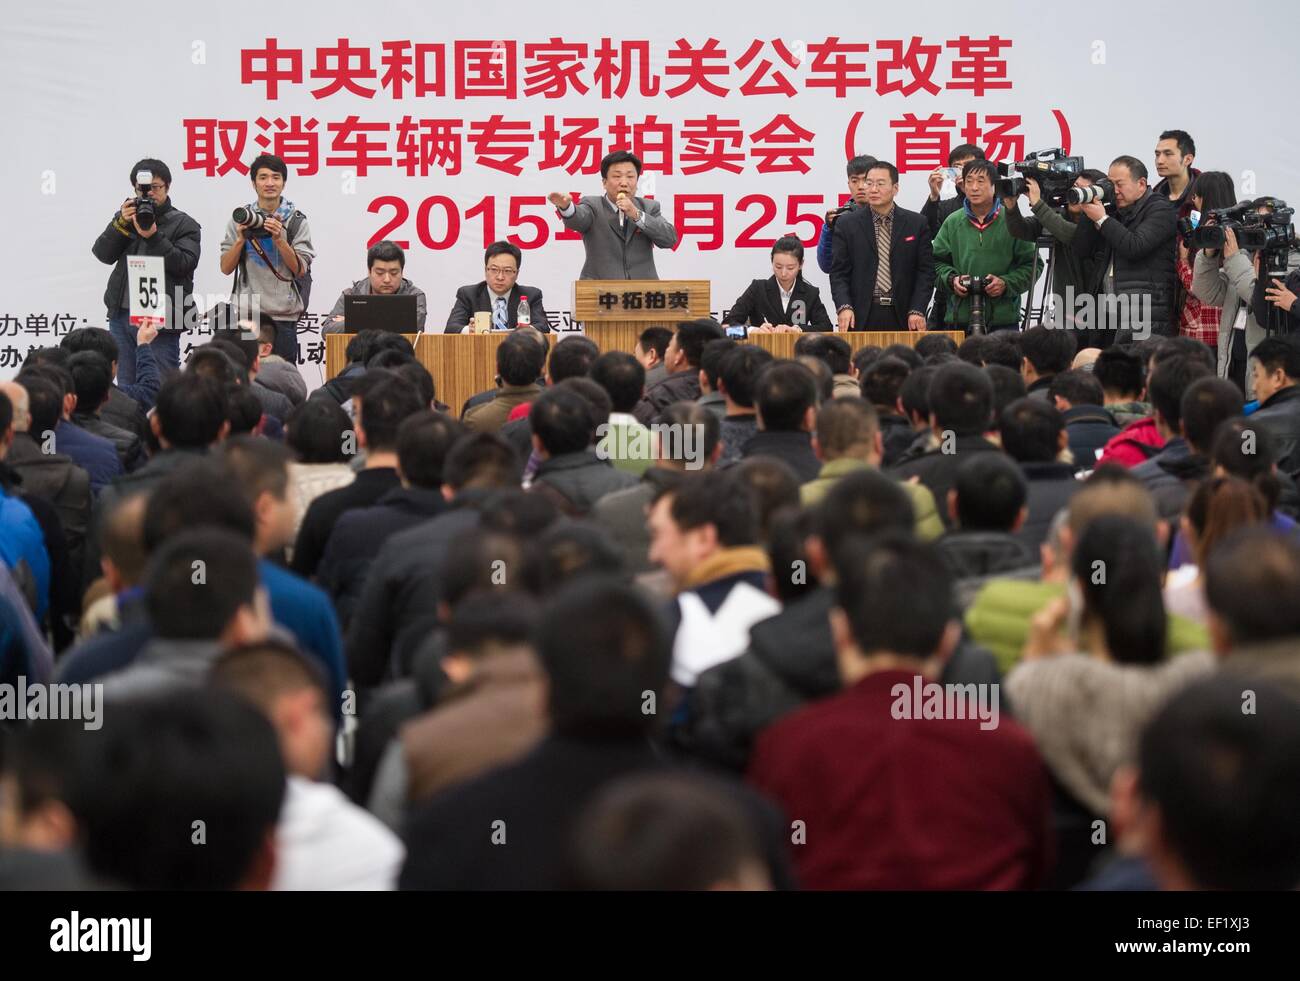 (150125) -- BEIJING, Jan. 25, 2015 (Xinhua) -- Photo taken on Jan. 25, 2015 shows an auction for the official vehicles in Beijing, capital of China. The central government has impounded 3,184 official vehicles and plans to auction the first 300 before the Spring Festival. (Xinhua/Luo Xiaoguang)(wyo) Stock Photo